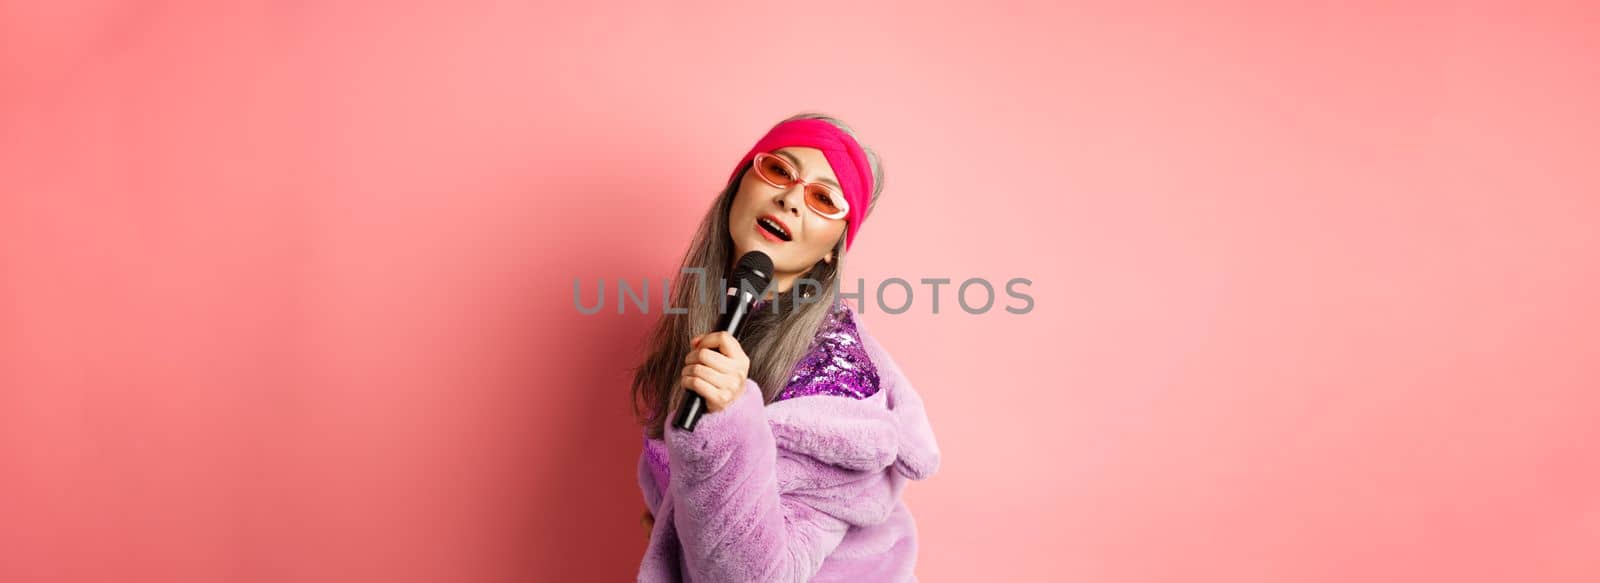 Stylish and sassy asian mature woman perform song on stage, holding mic and singing karaoke, wearing trendy heart-shaped sunglasses and faux fur coat, pink background.